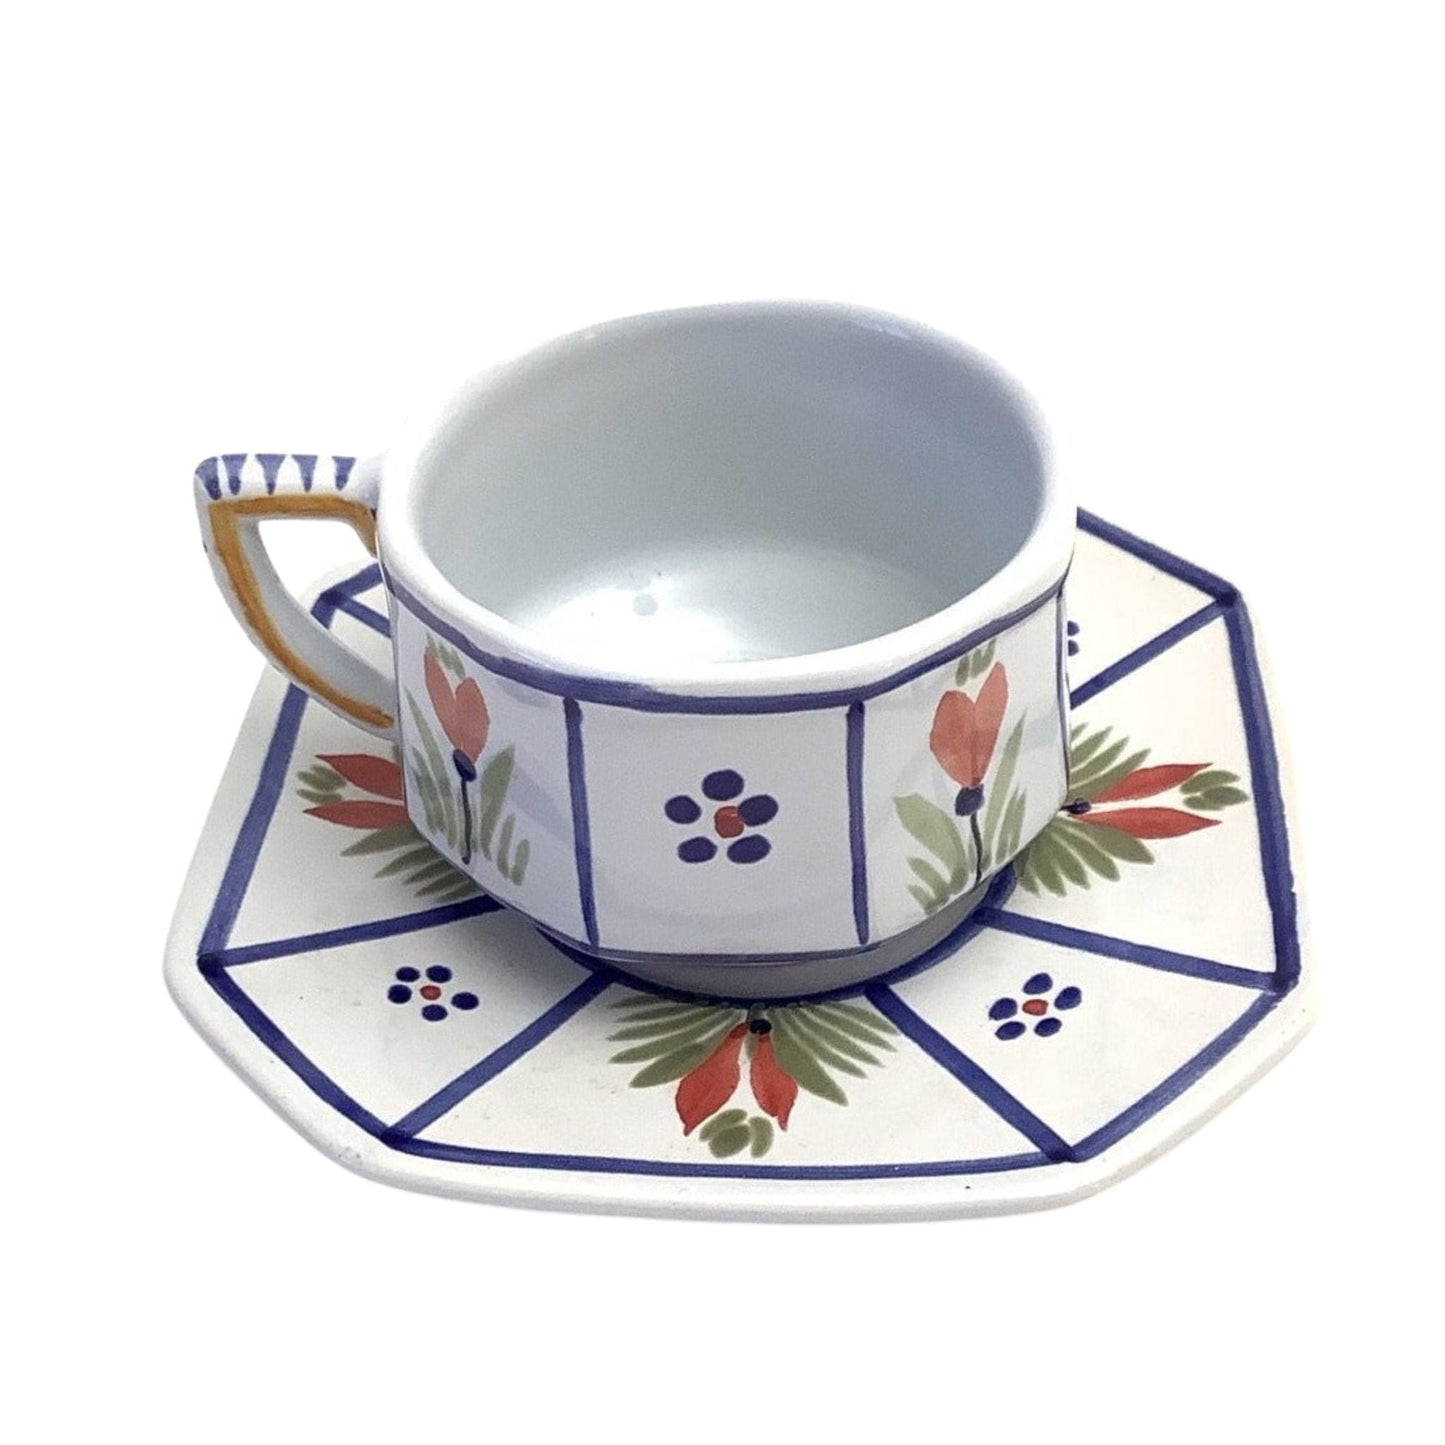 Henriot Man Cup and Saucer Multi / Pottery / Faience